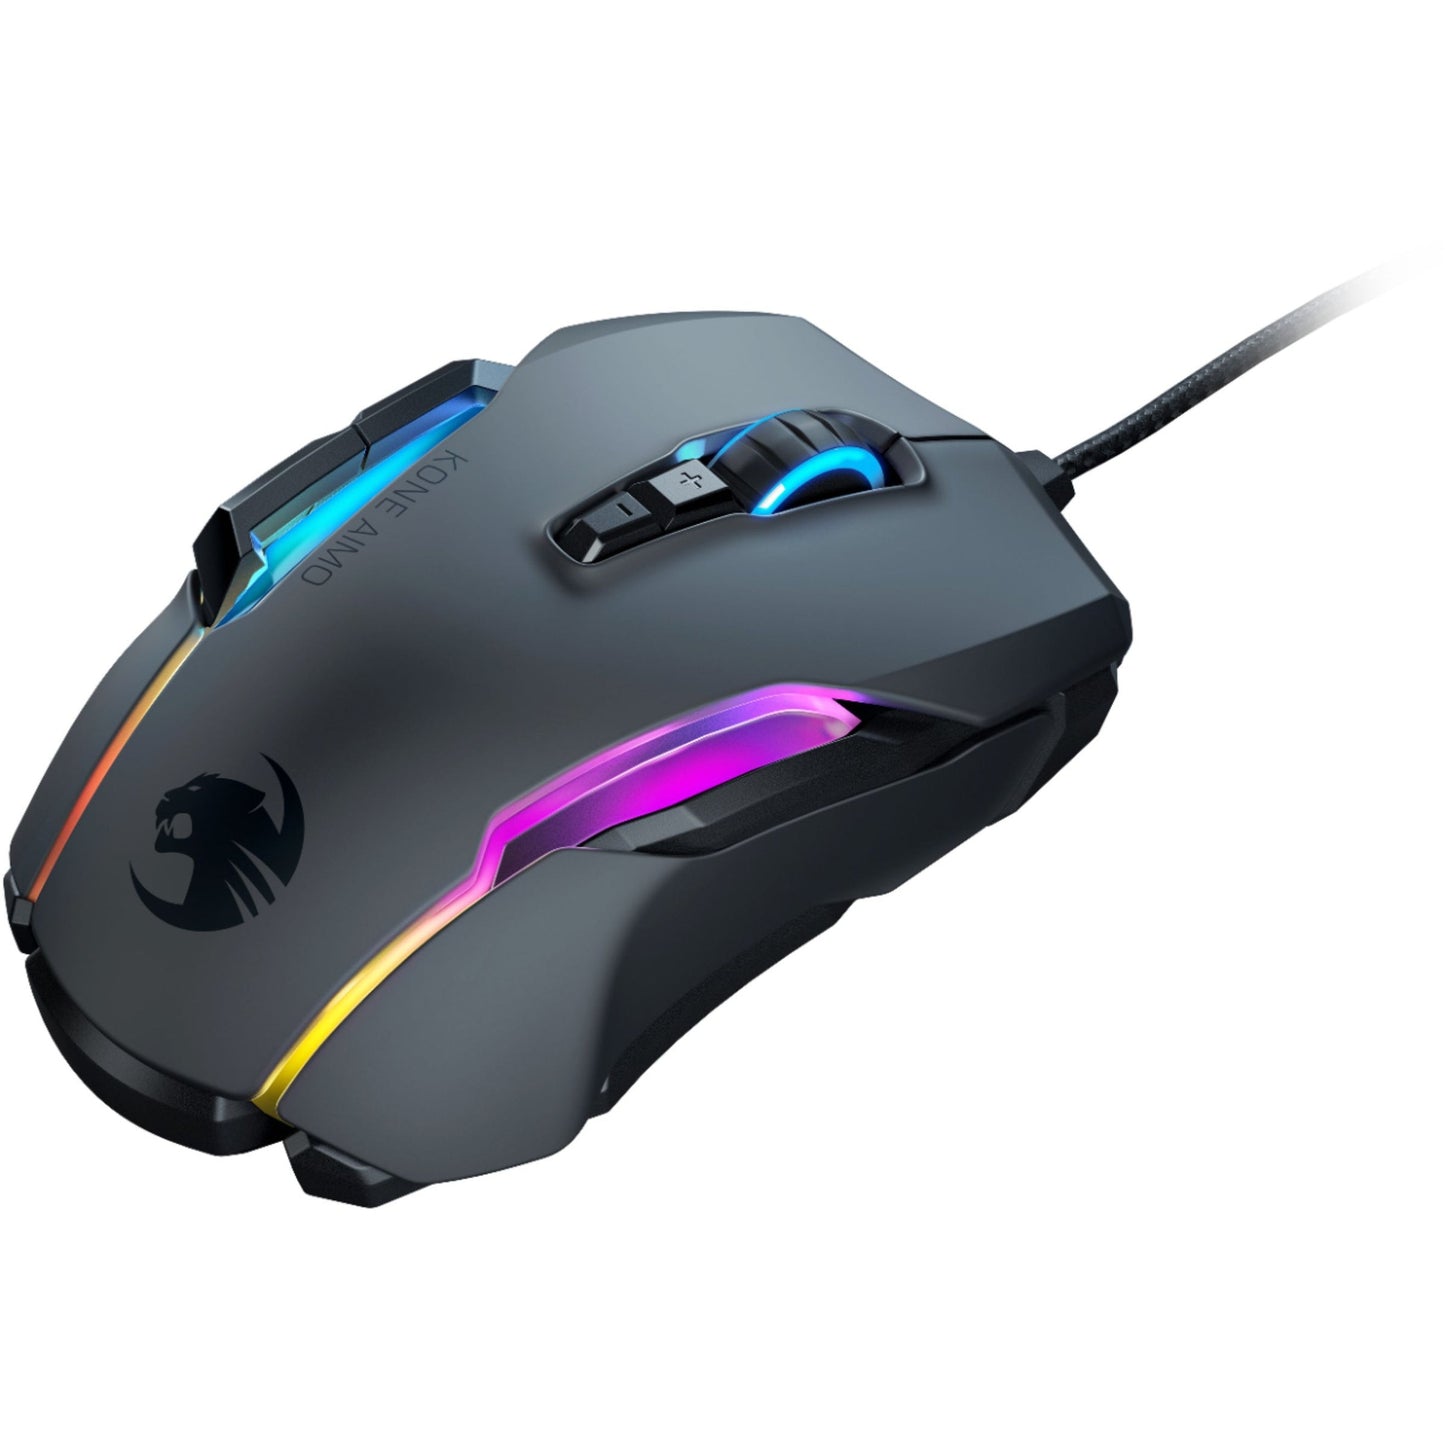 ROCCAT Kone AIMO Remastered Gaming Mouse, Black